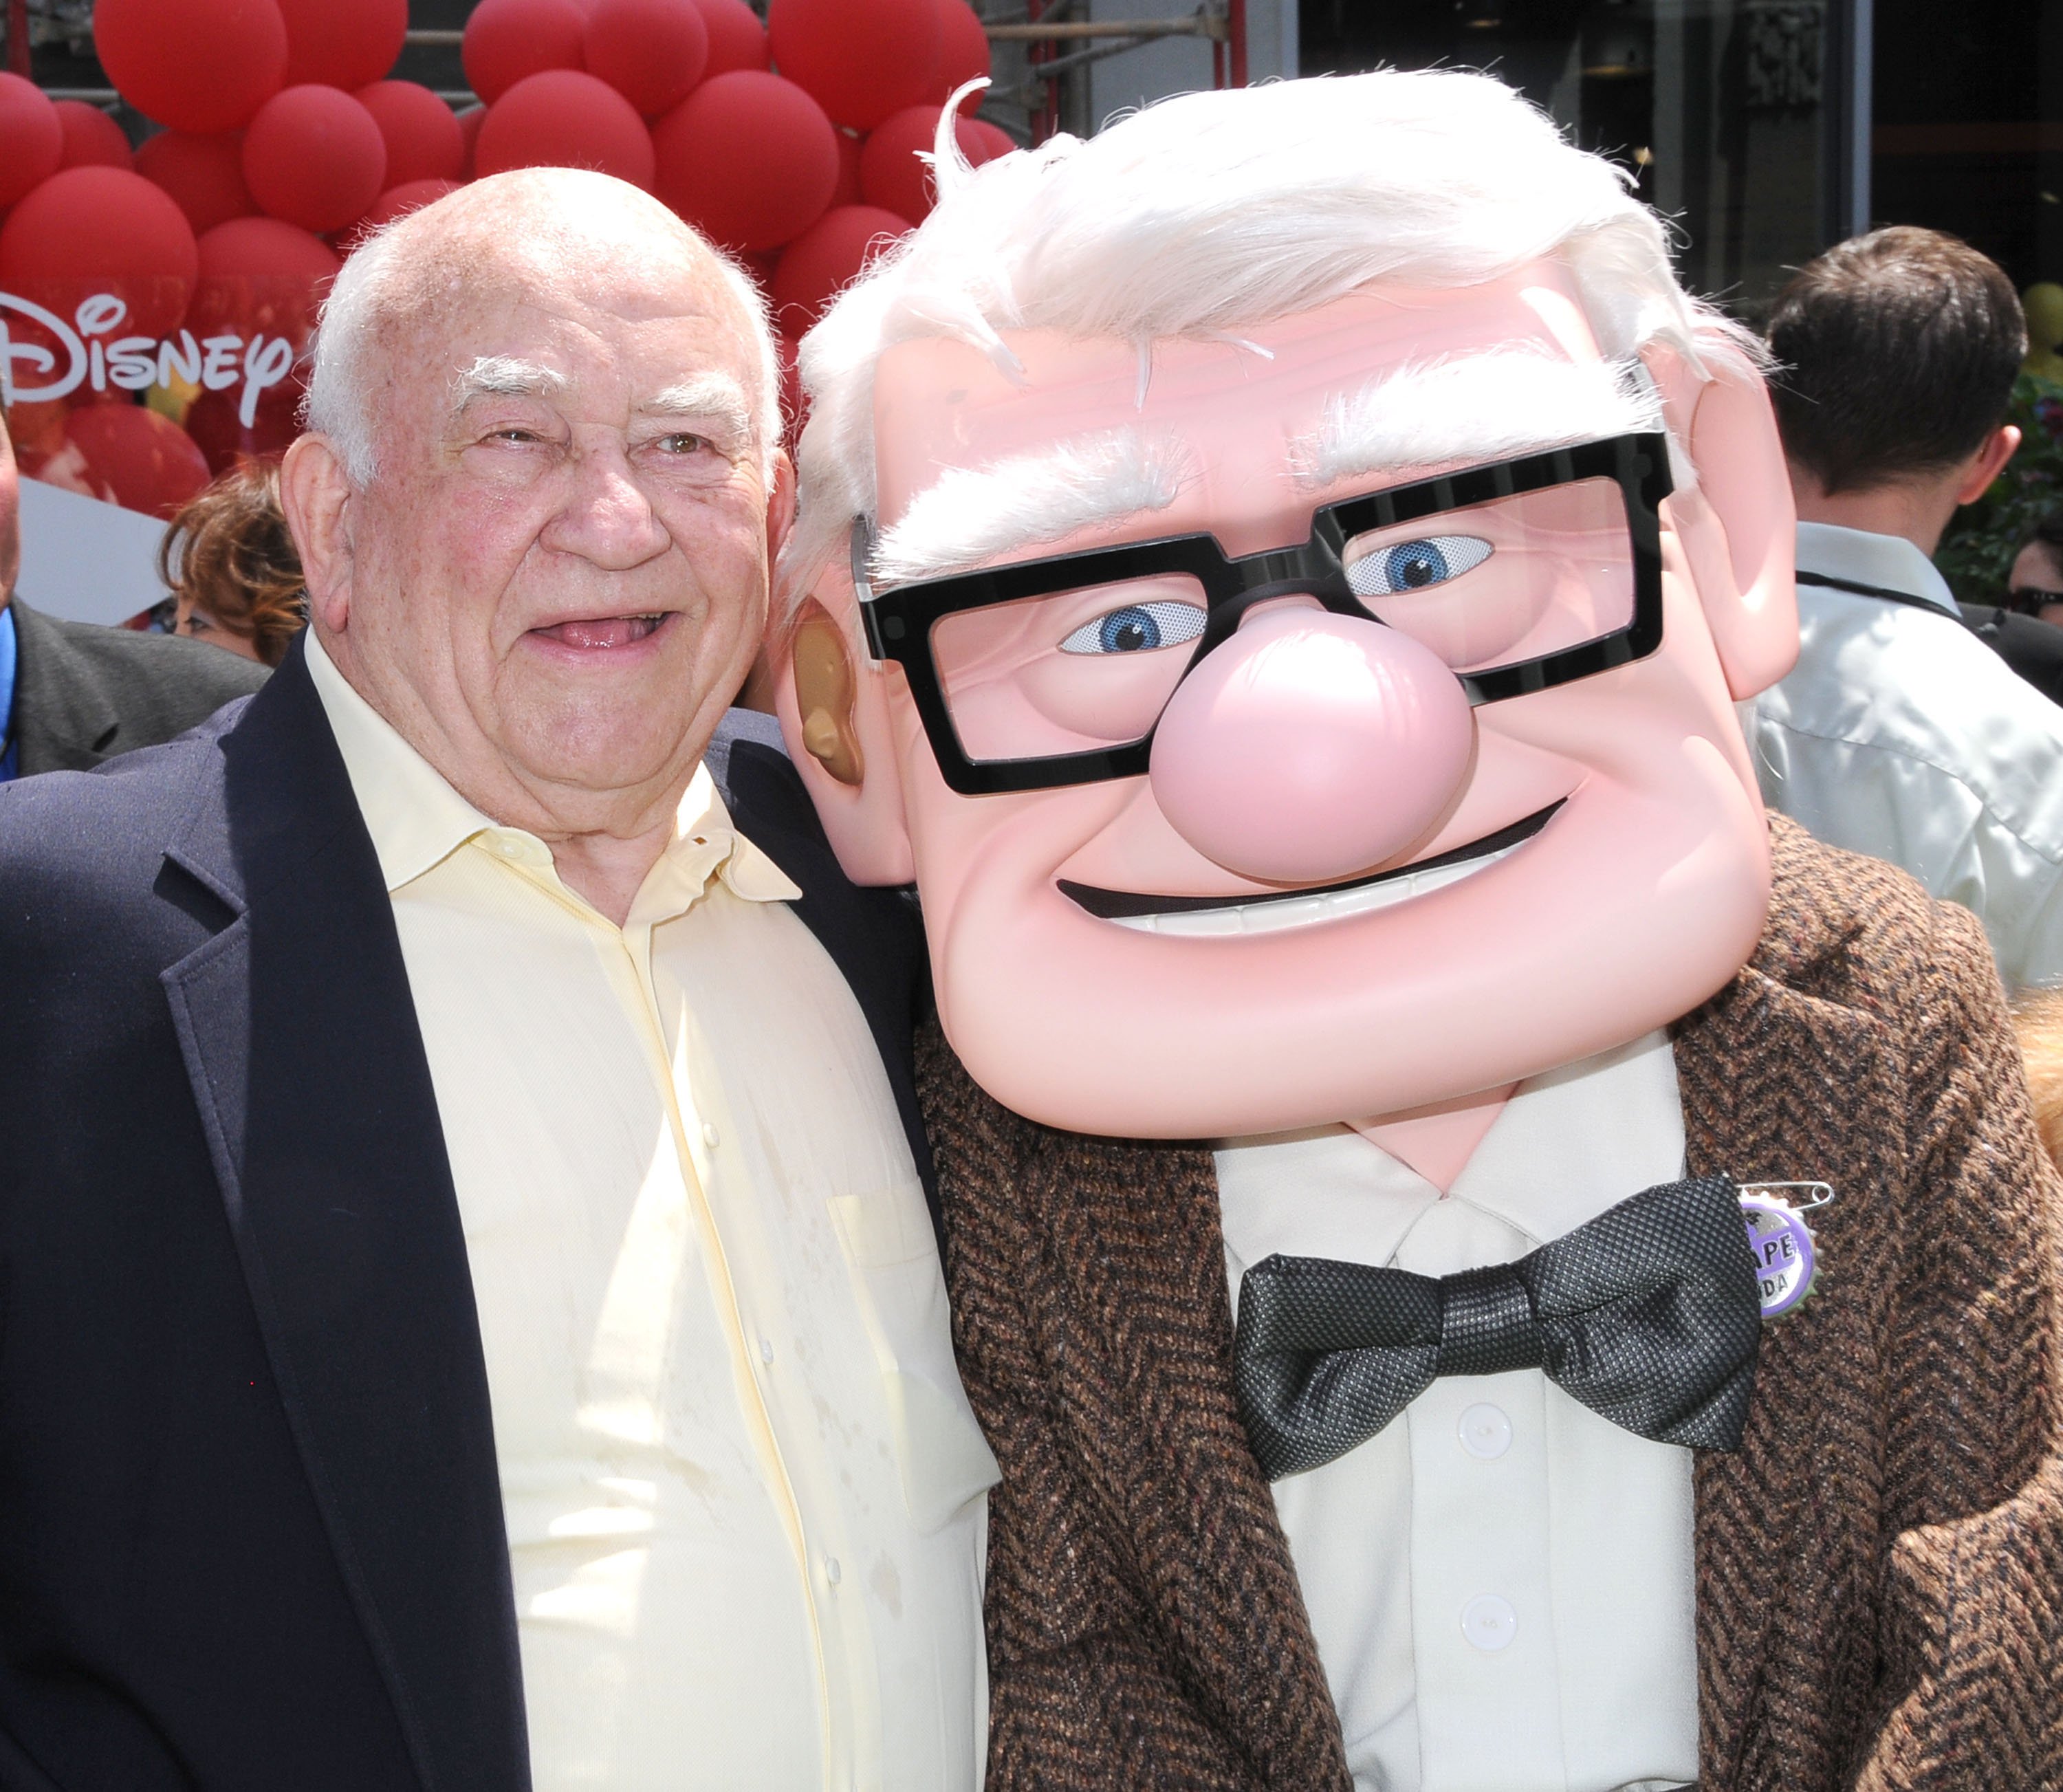 Ed Asner Was ‘Relieved’ at ‘How Adult’ Disney Pixar’s ‘Up’ Is